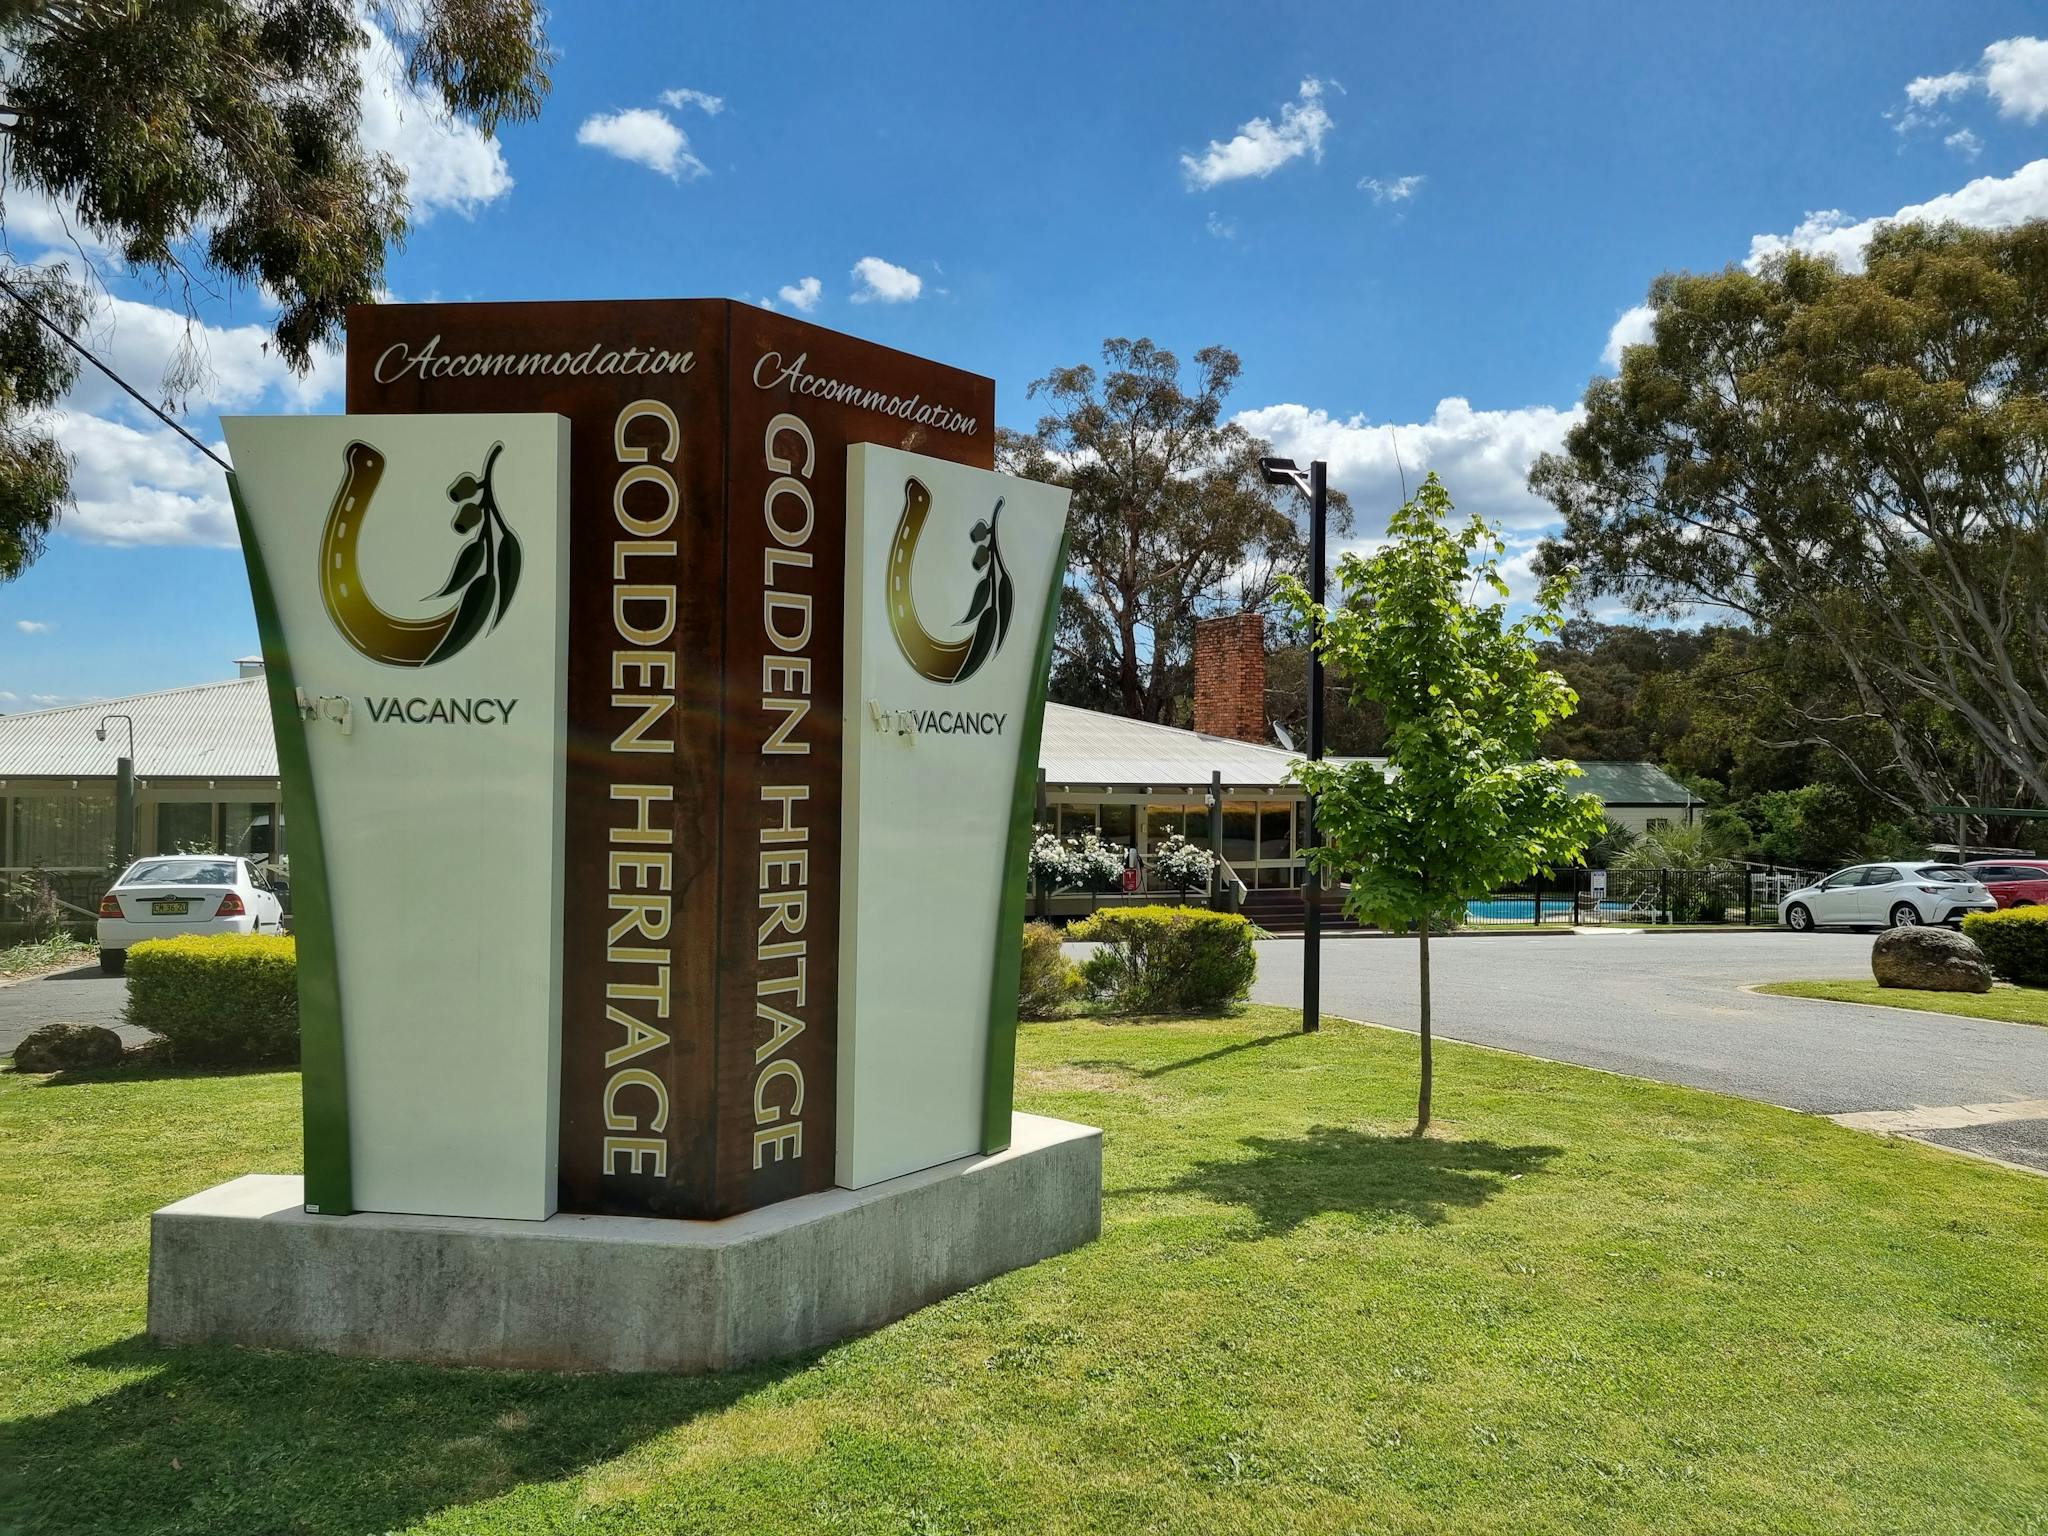 Golden Heritage Accommodation signage at front of property